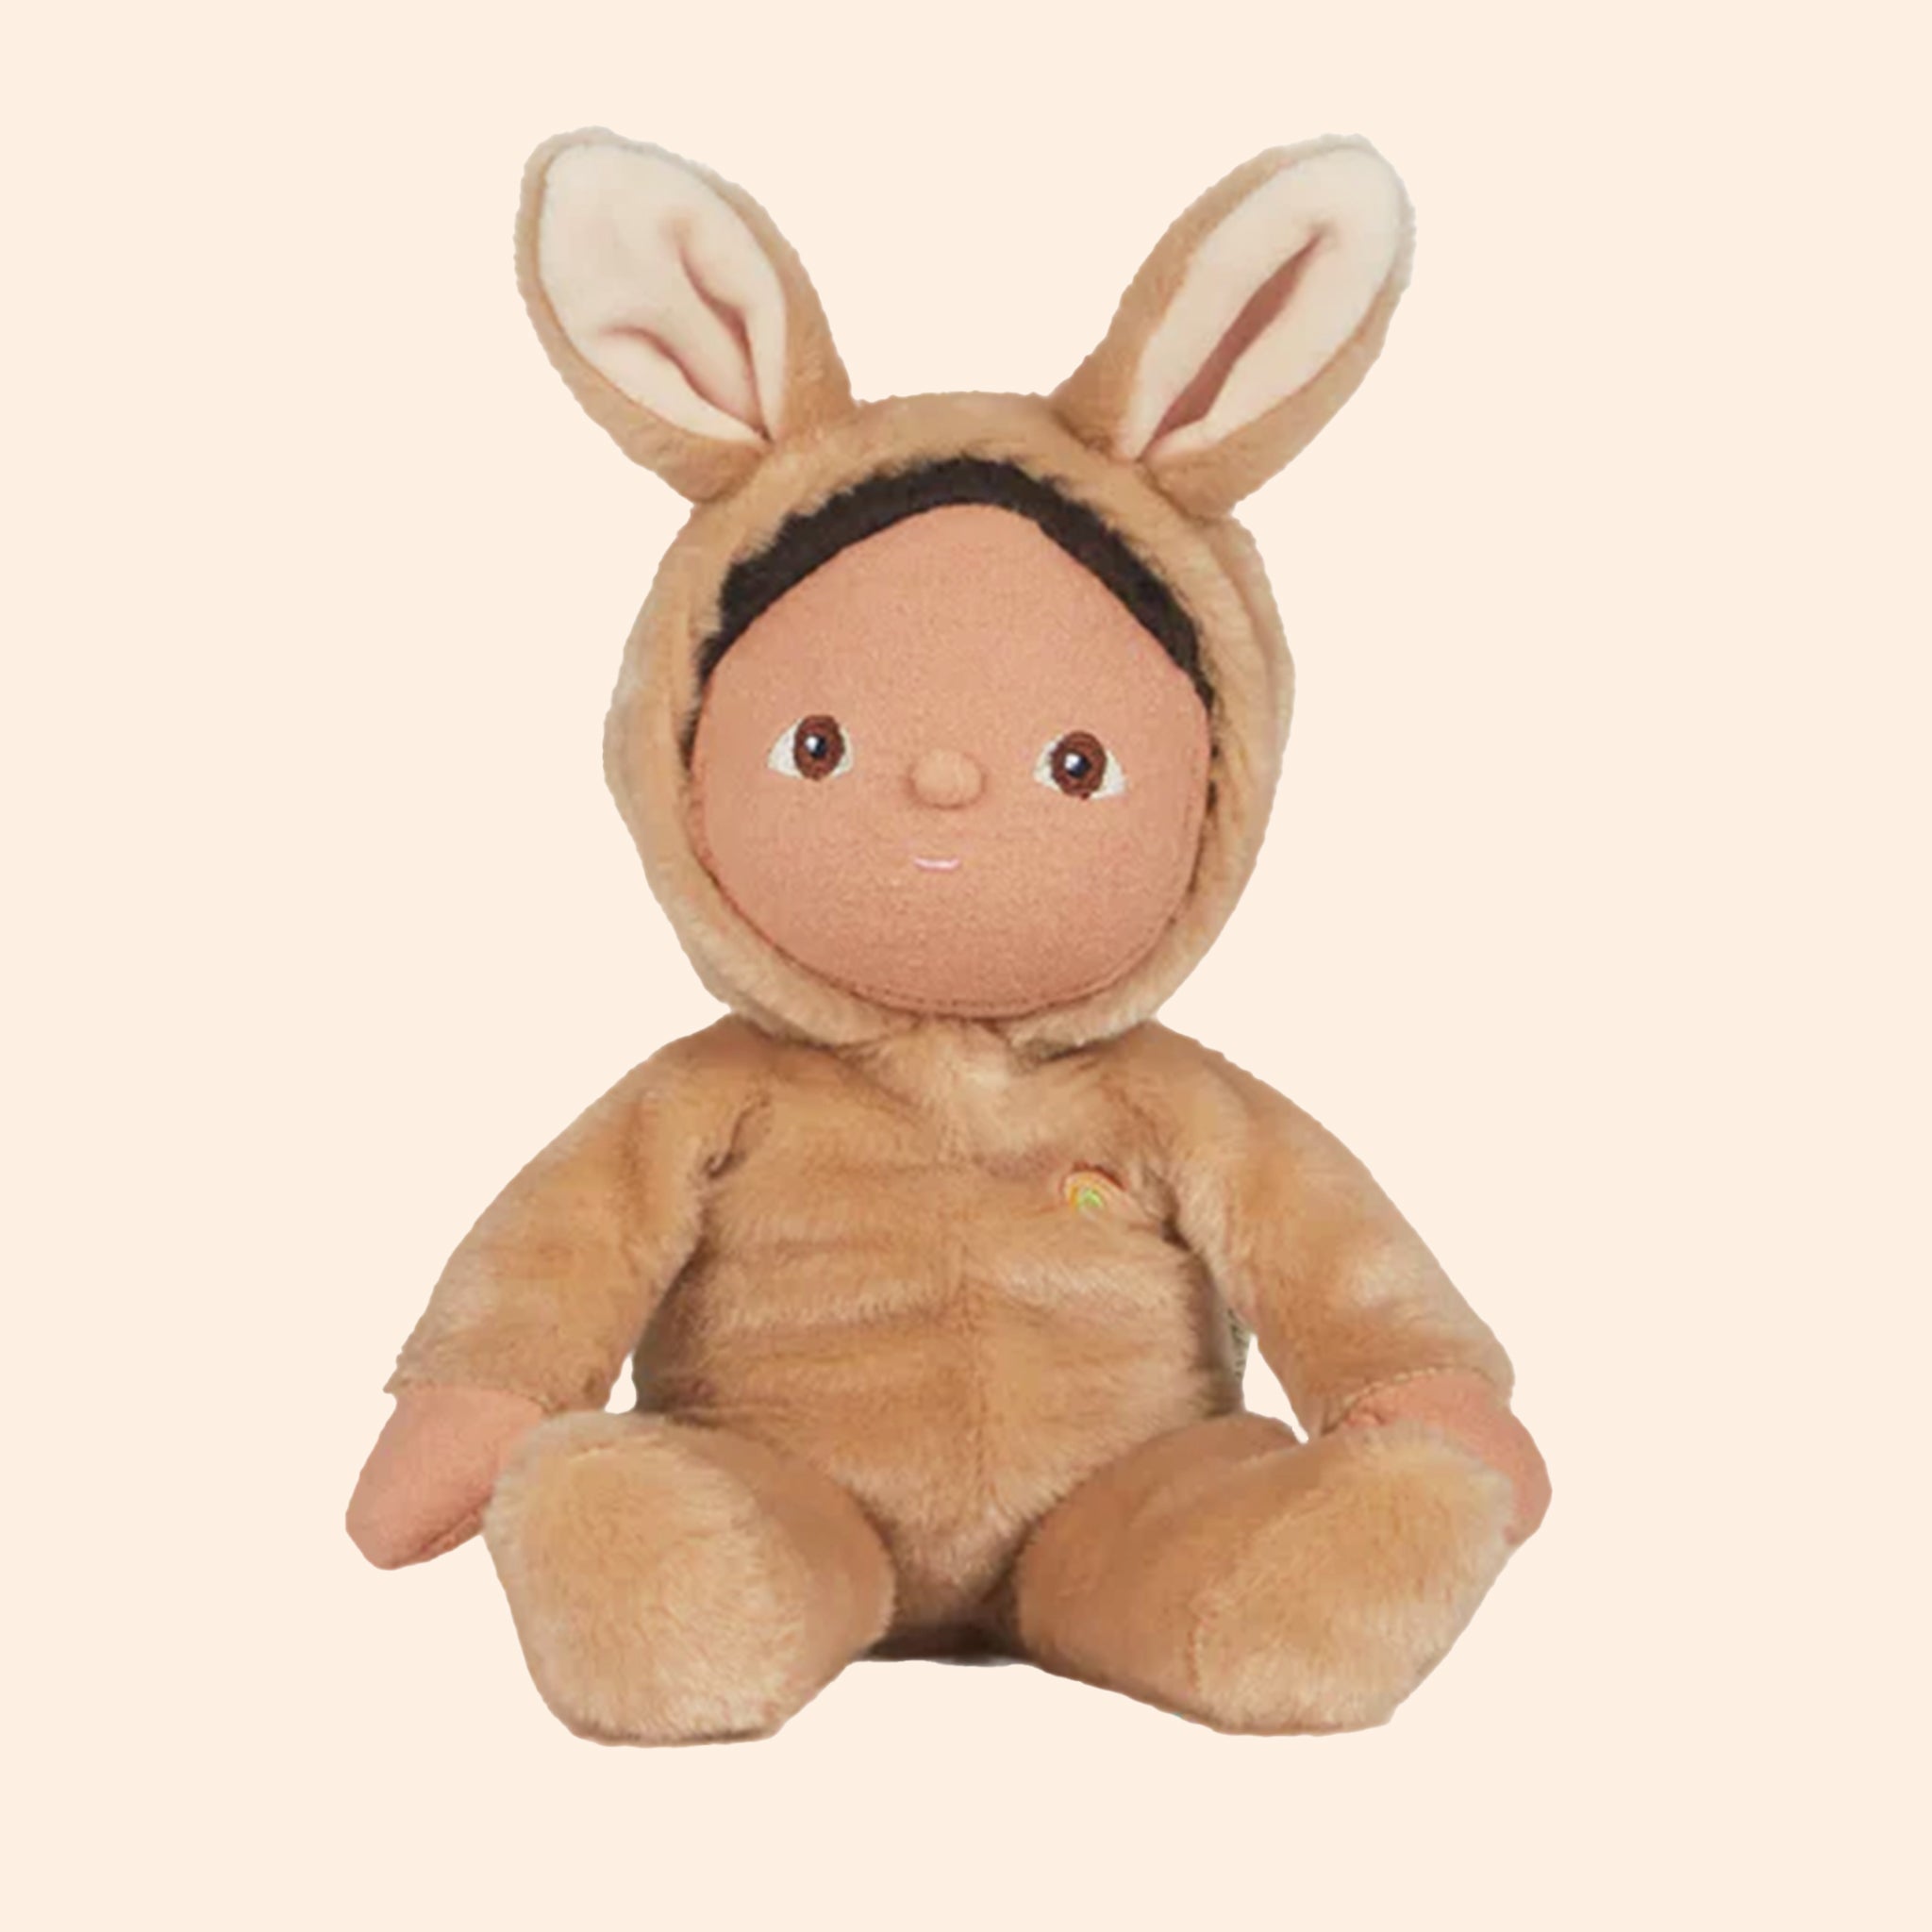 On a tan background is a doll wearing a fuzzy tan bunny onesie.